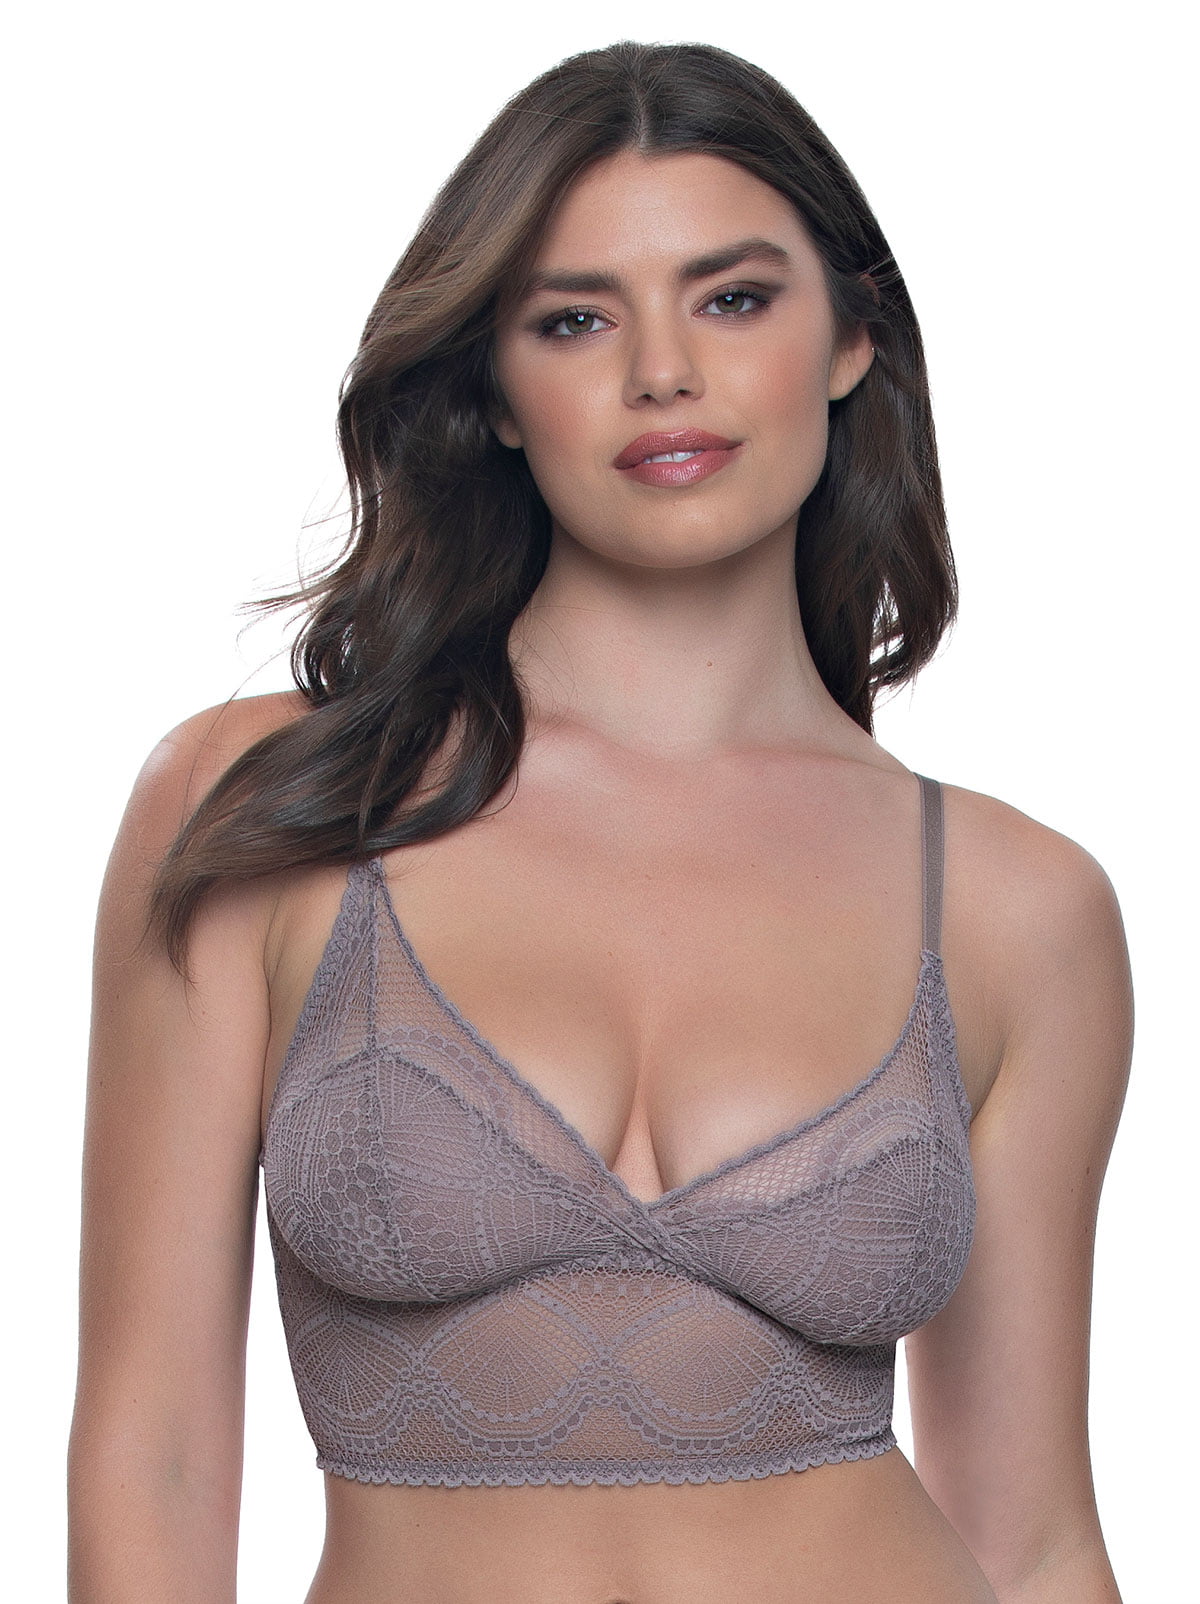 Felina Finesse Cami Bralette - Stretchy Lace Bralettes For Women - Sexy and  Comfortable - Inclusive Sizing, From Small To Plus Size. (Mink, 1X-2X)